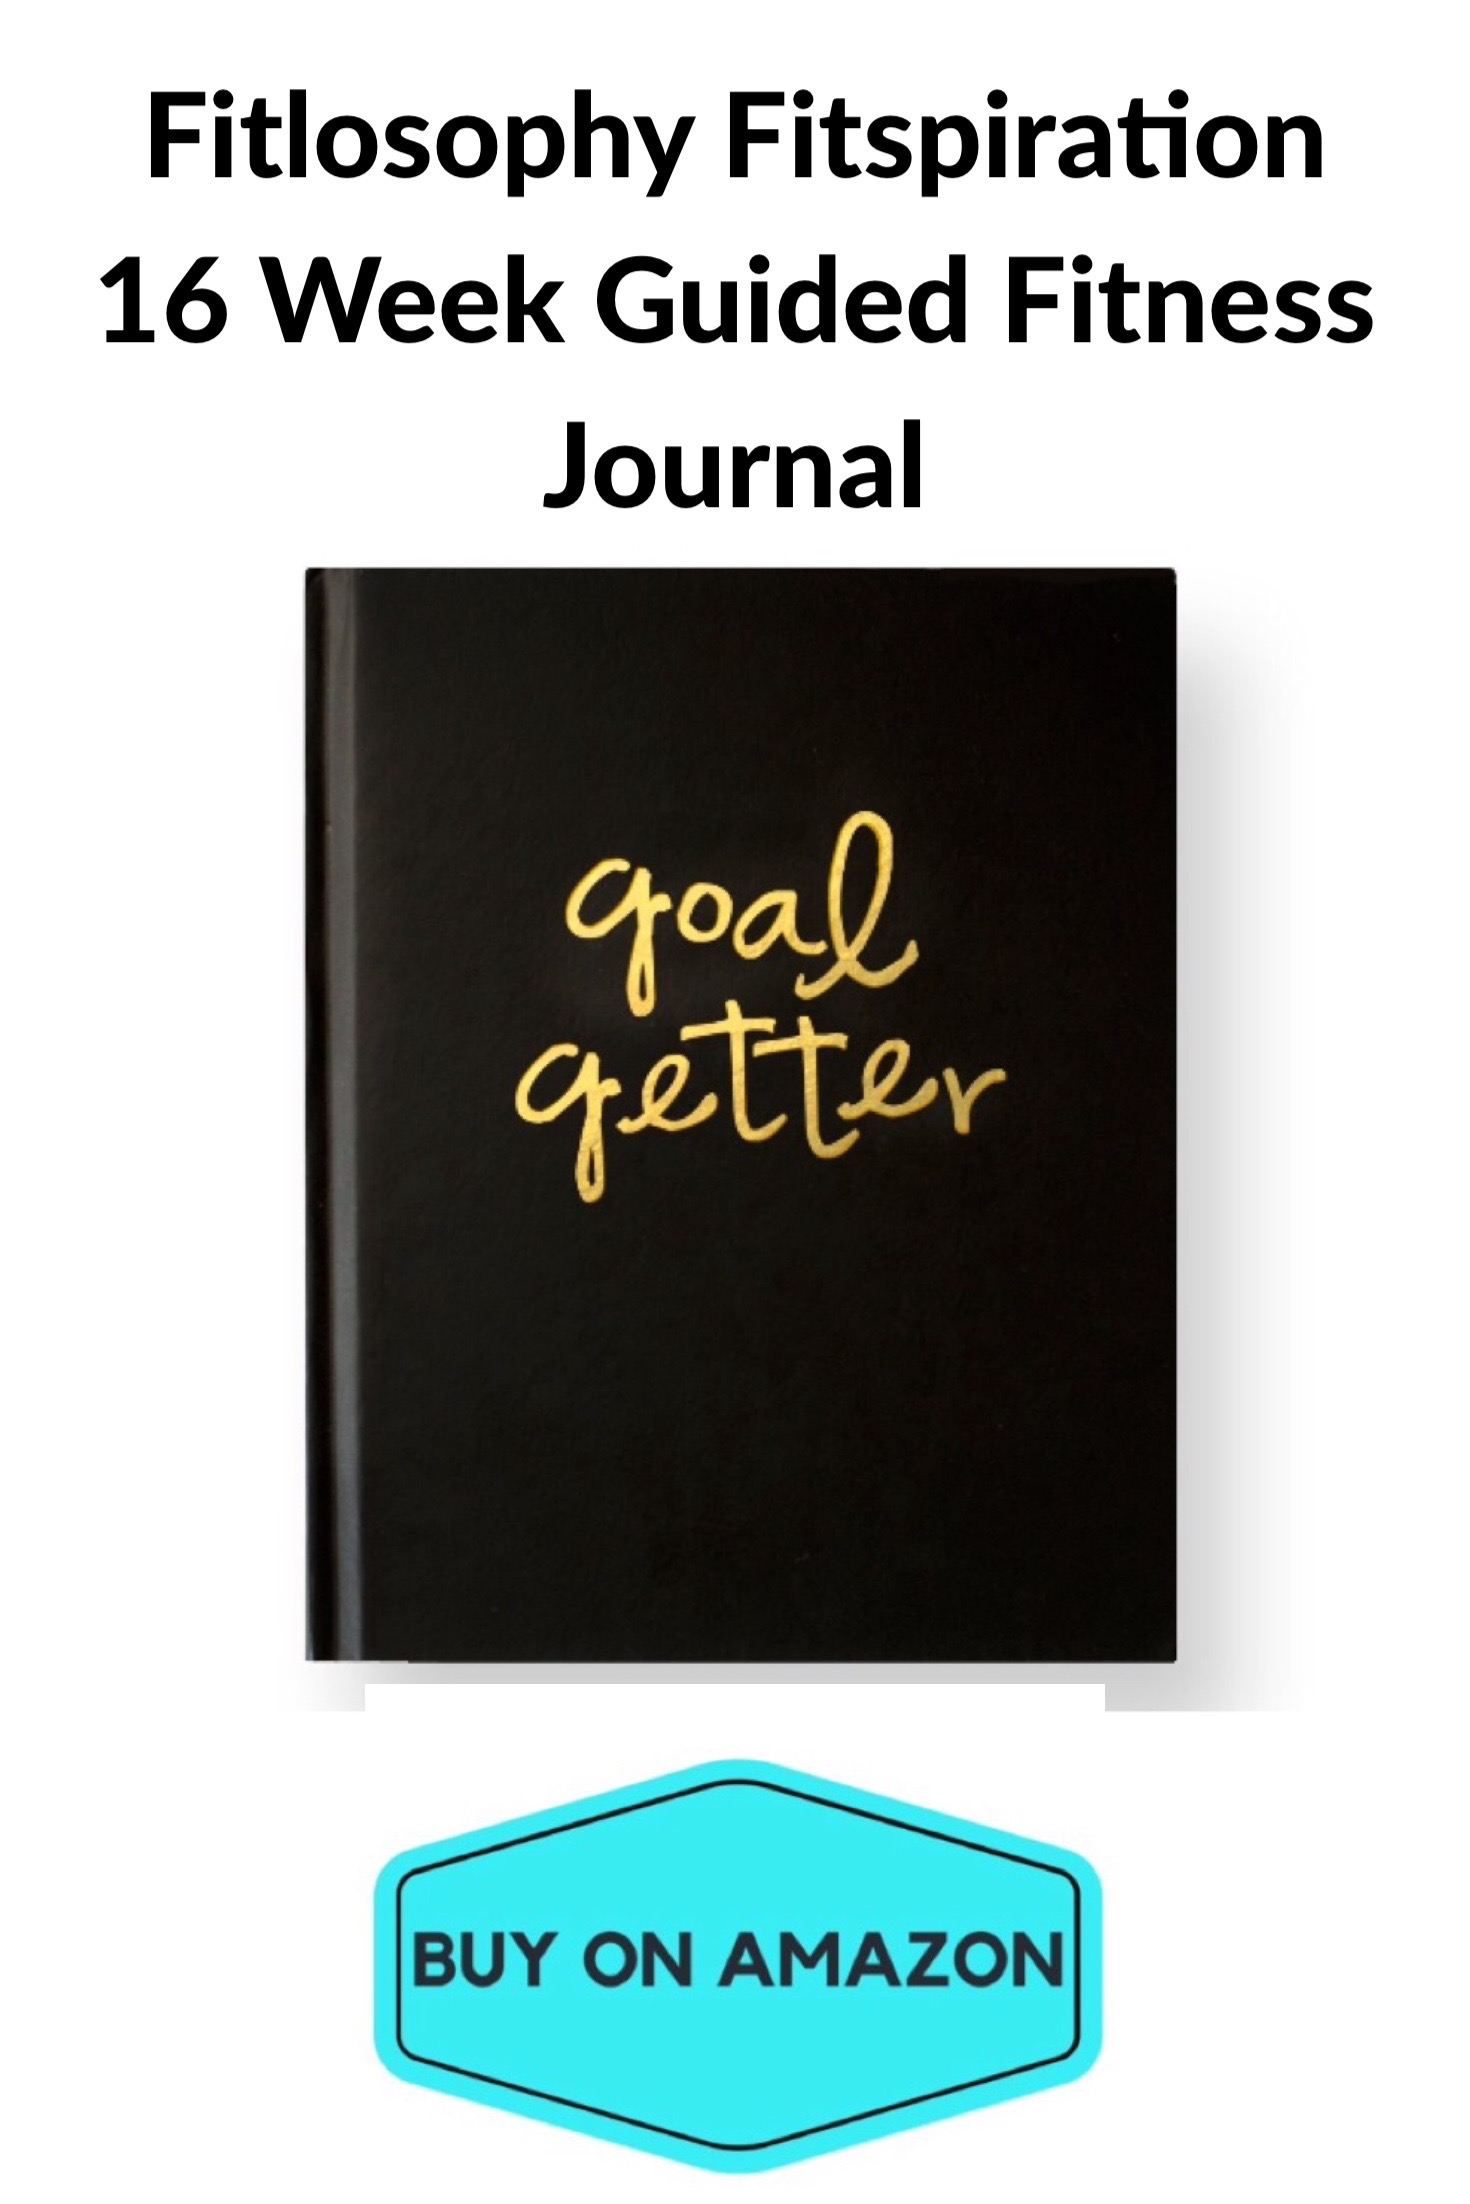 Fitlosophy Fitspiration 16 Week Guided Fitness Journal